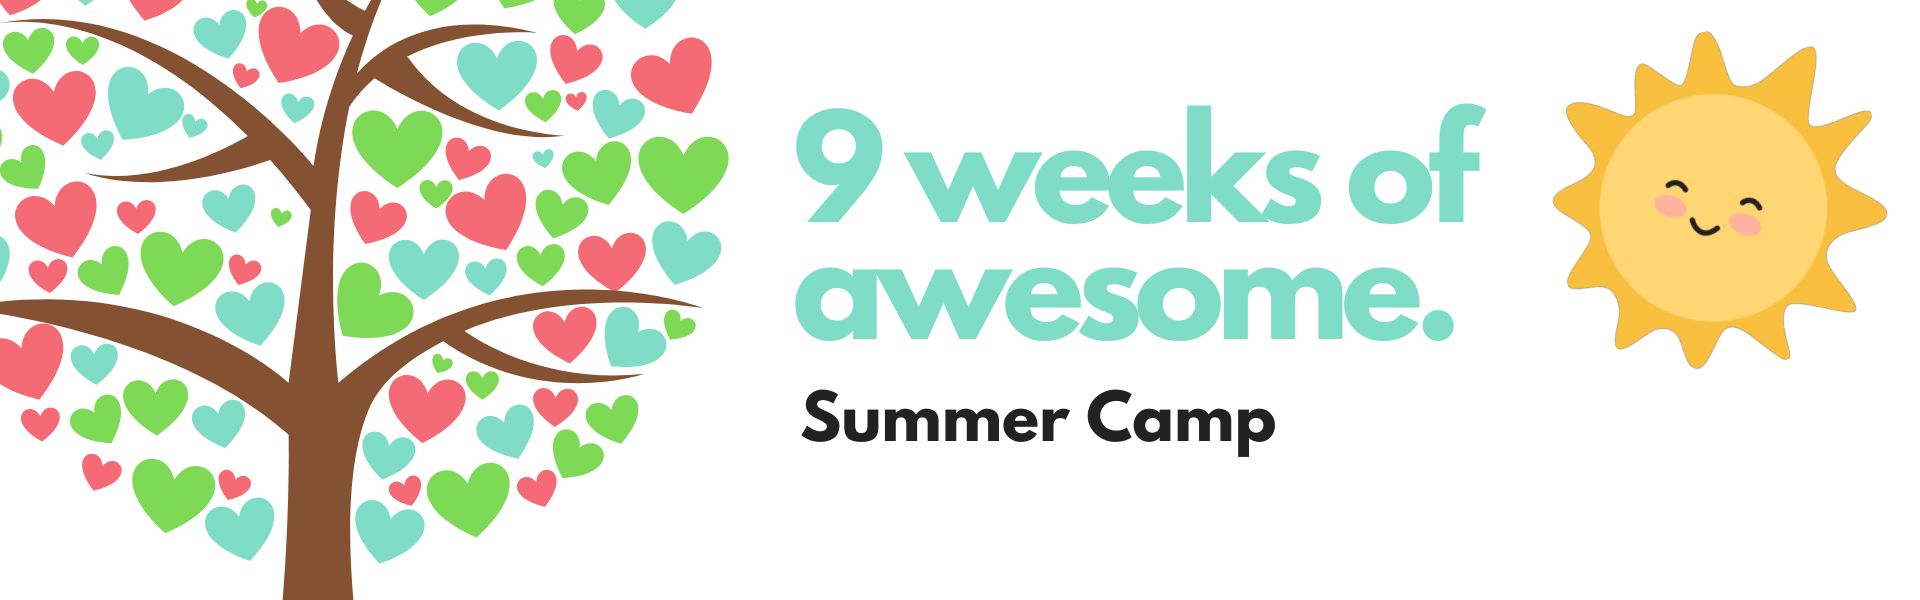 So excited for 9 Weeks of Awesome Summer Camps!